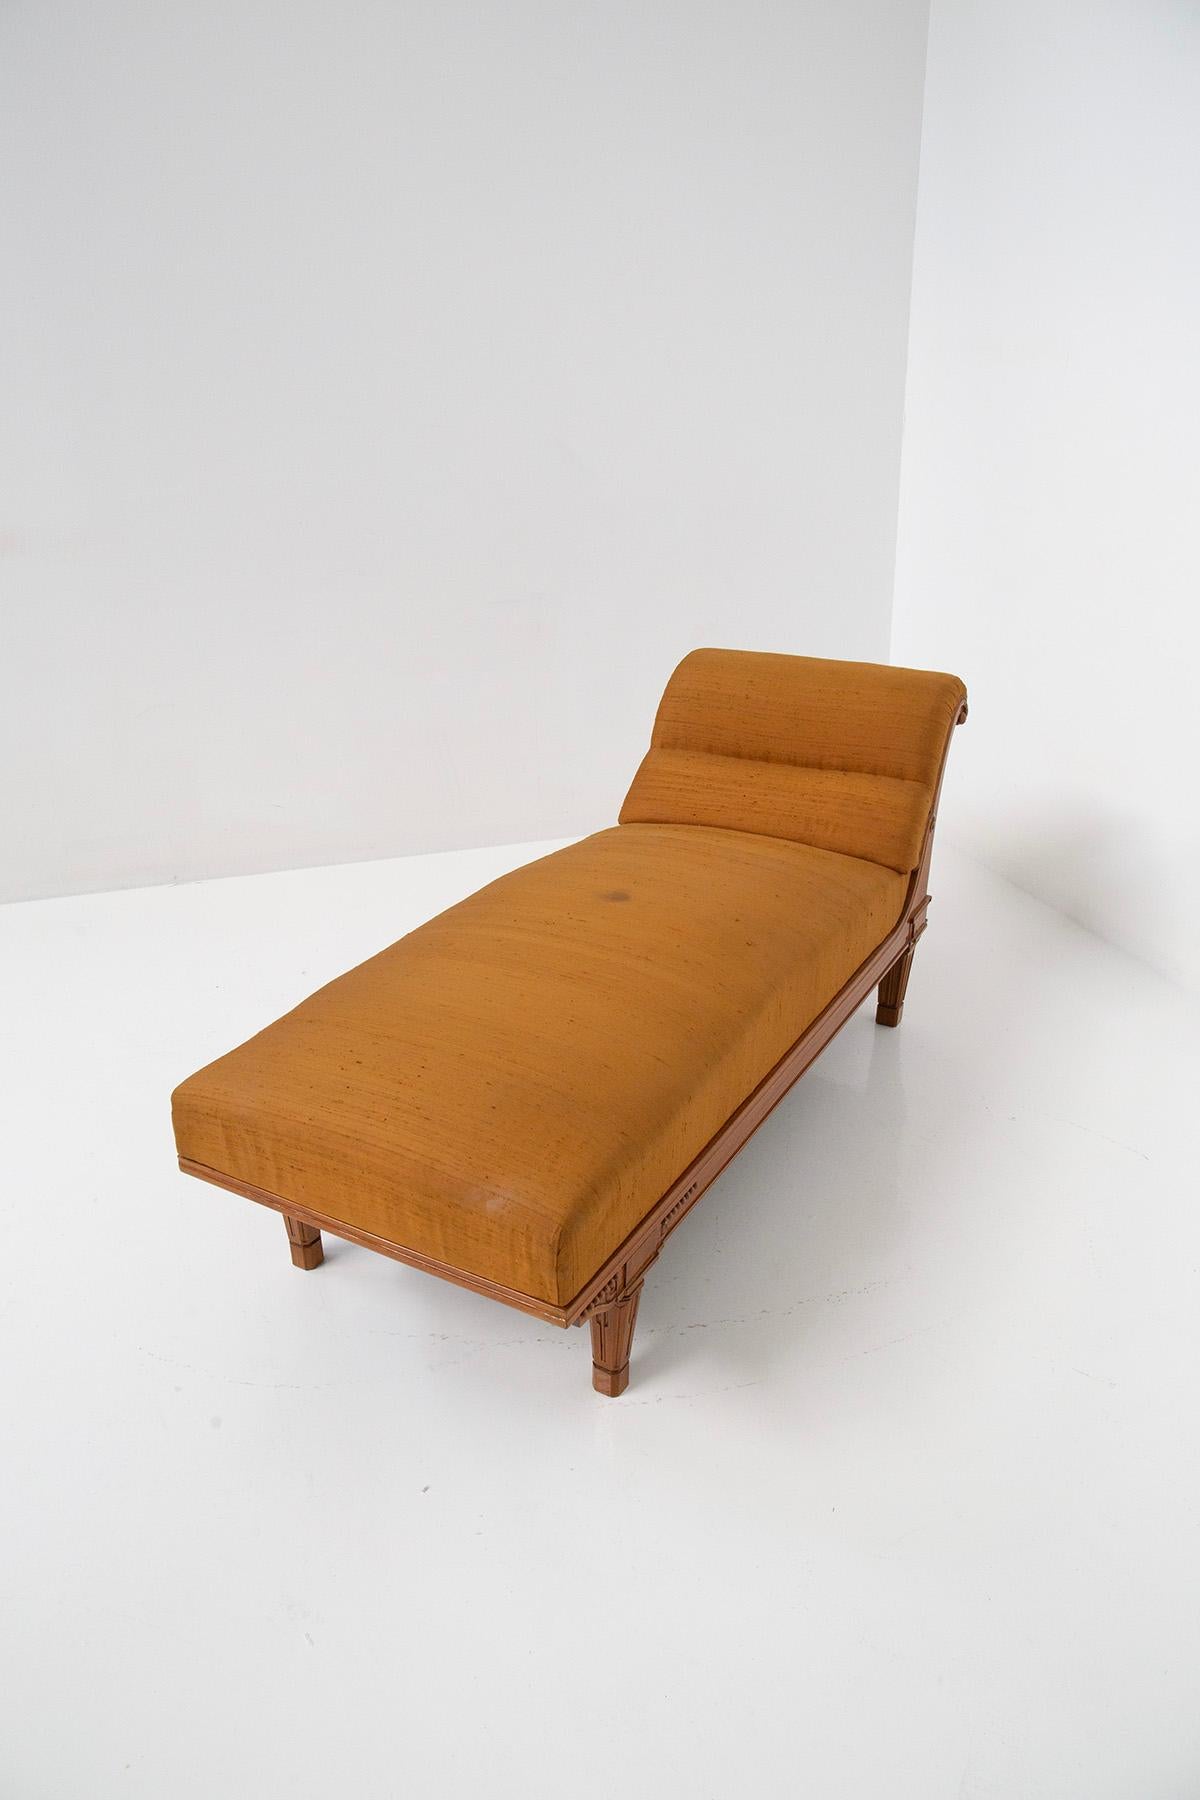 French Art Deco Lounge Chair in Orange Silk Satin For Sale 4